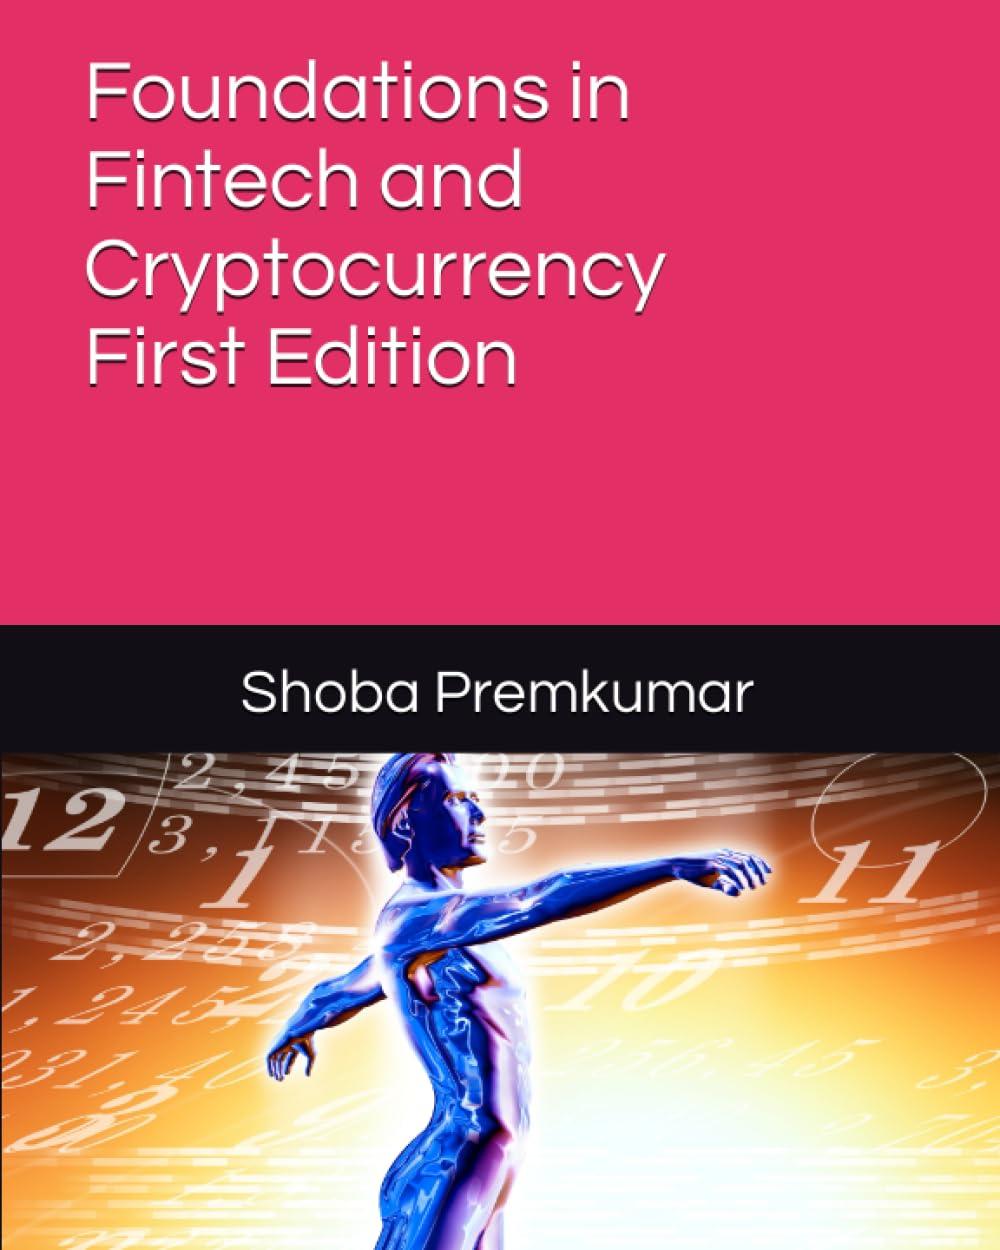 foundations in fintech and cryptocurrency 1st edition shoba premkumar 8395179999, 979-8395179999